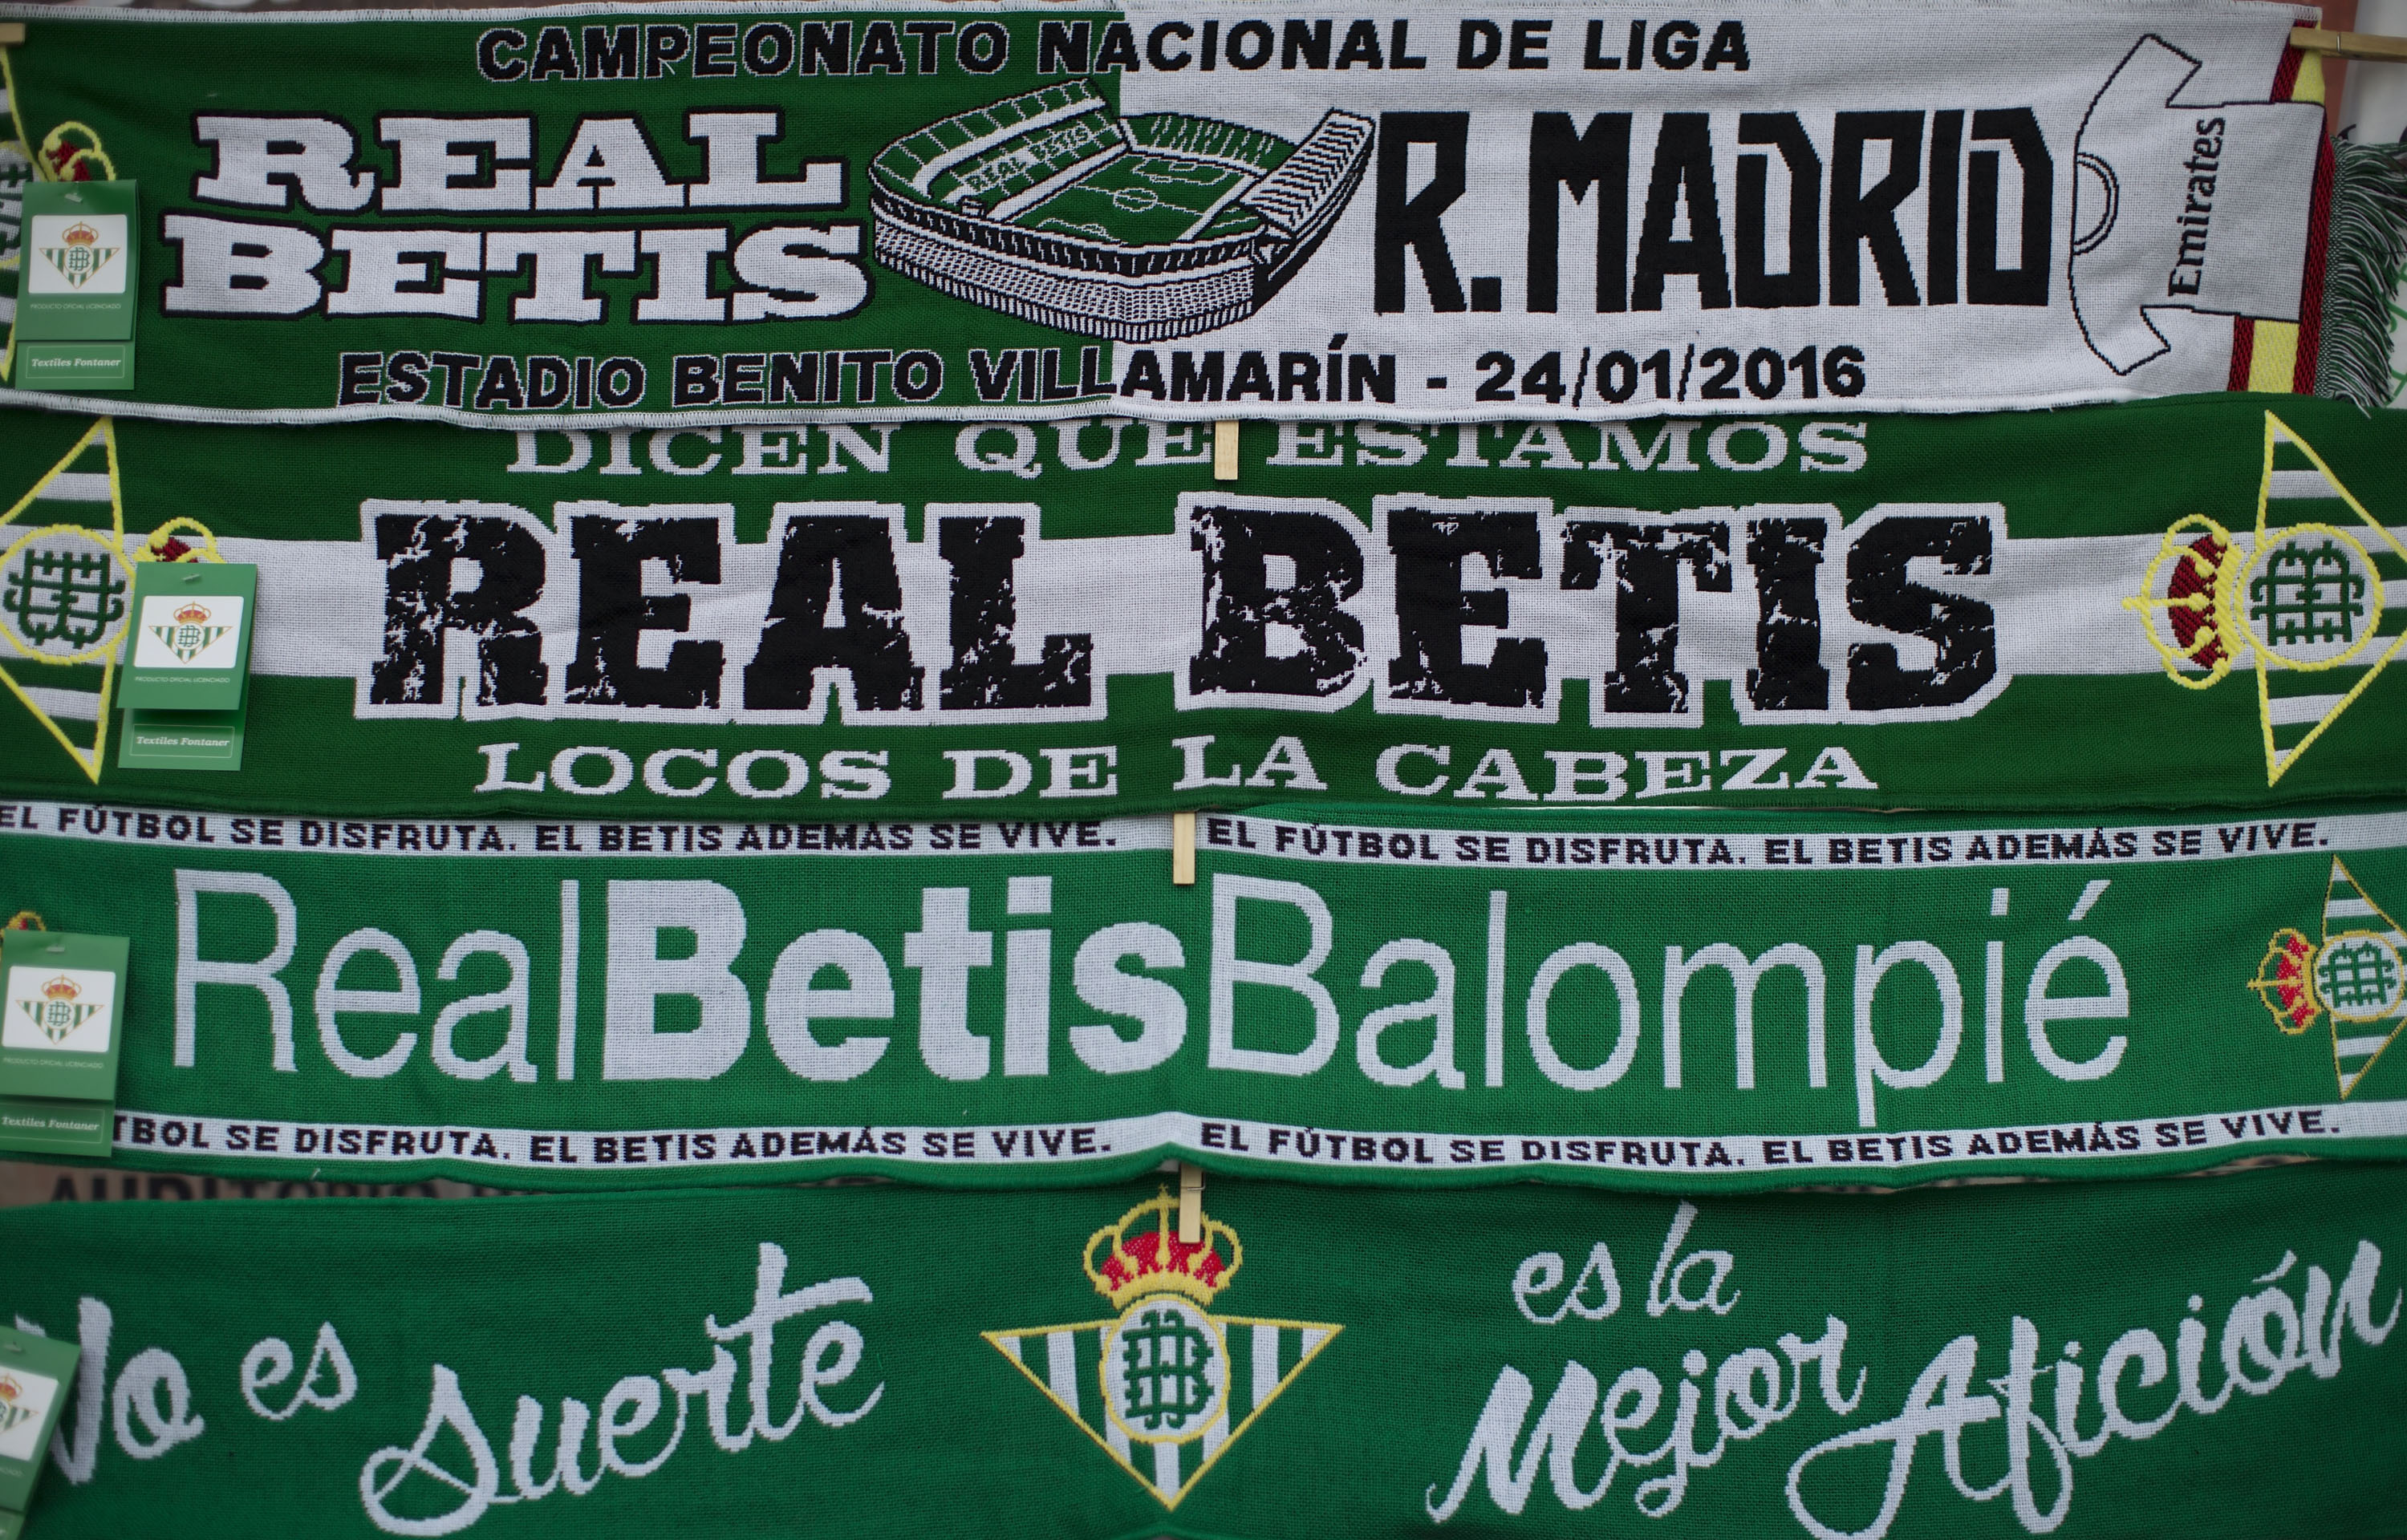 SEVILLE, SPAIN - JANUARY 24:  The match' scarf is displayed at a merchandaising stall at Estadio Benito Villamarin outdoors before the La Liga match between Real Betis Balompie and Real Madrid CF at on January 24, 2016 in Seville, Spain.  (Photo by Gonzalo Arroyo Moreno/Getty Images)